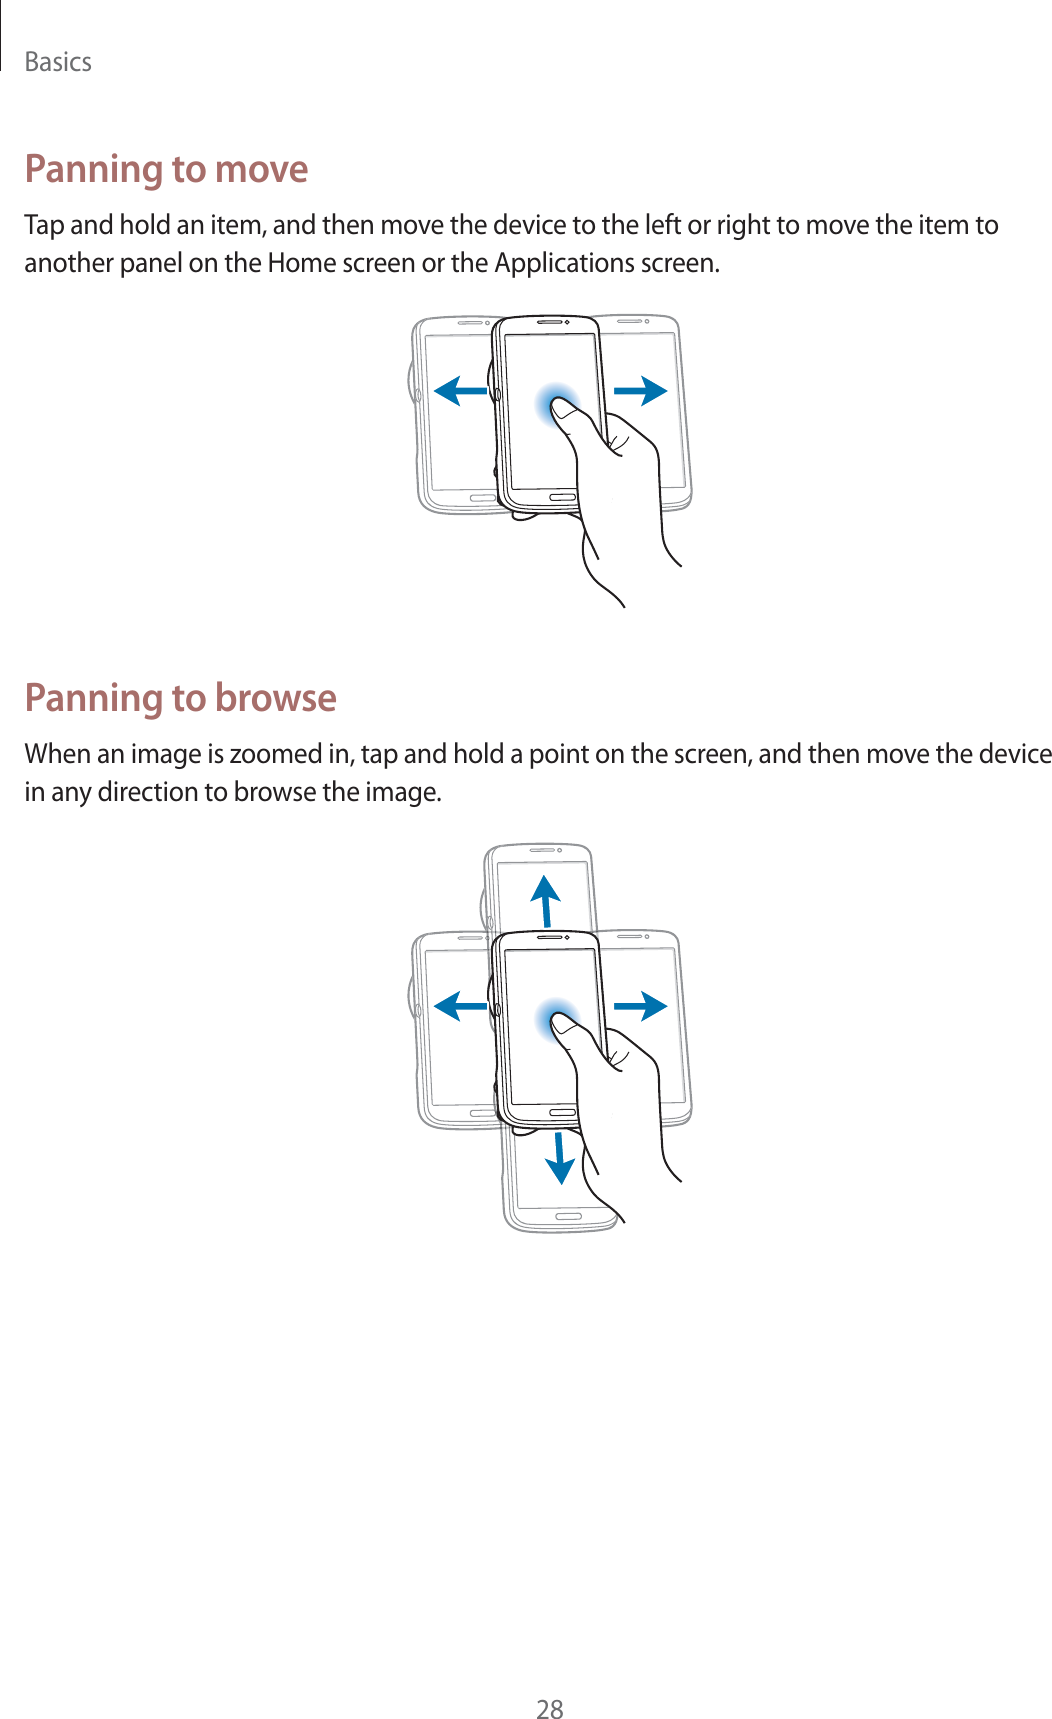 Basics28Panning to moveTap and hold an item, and then move the device to the left or right to move the item to another panel on the Home screen or the Applications screen.Panning to browseWhen an image is zoomed in, tap and hold a point on the screen, and then move the device in any direction to browse the image.